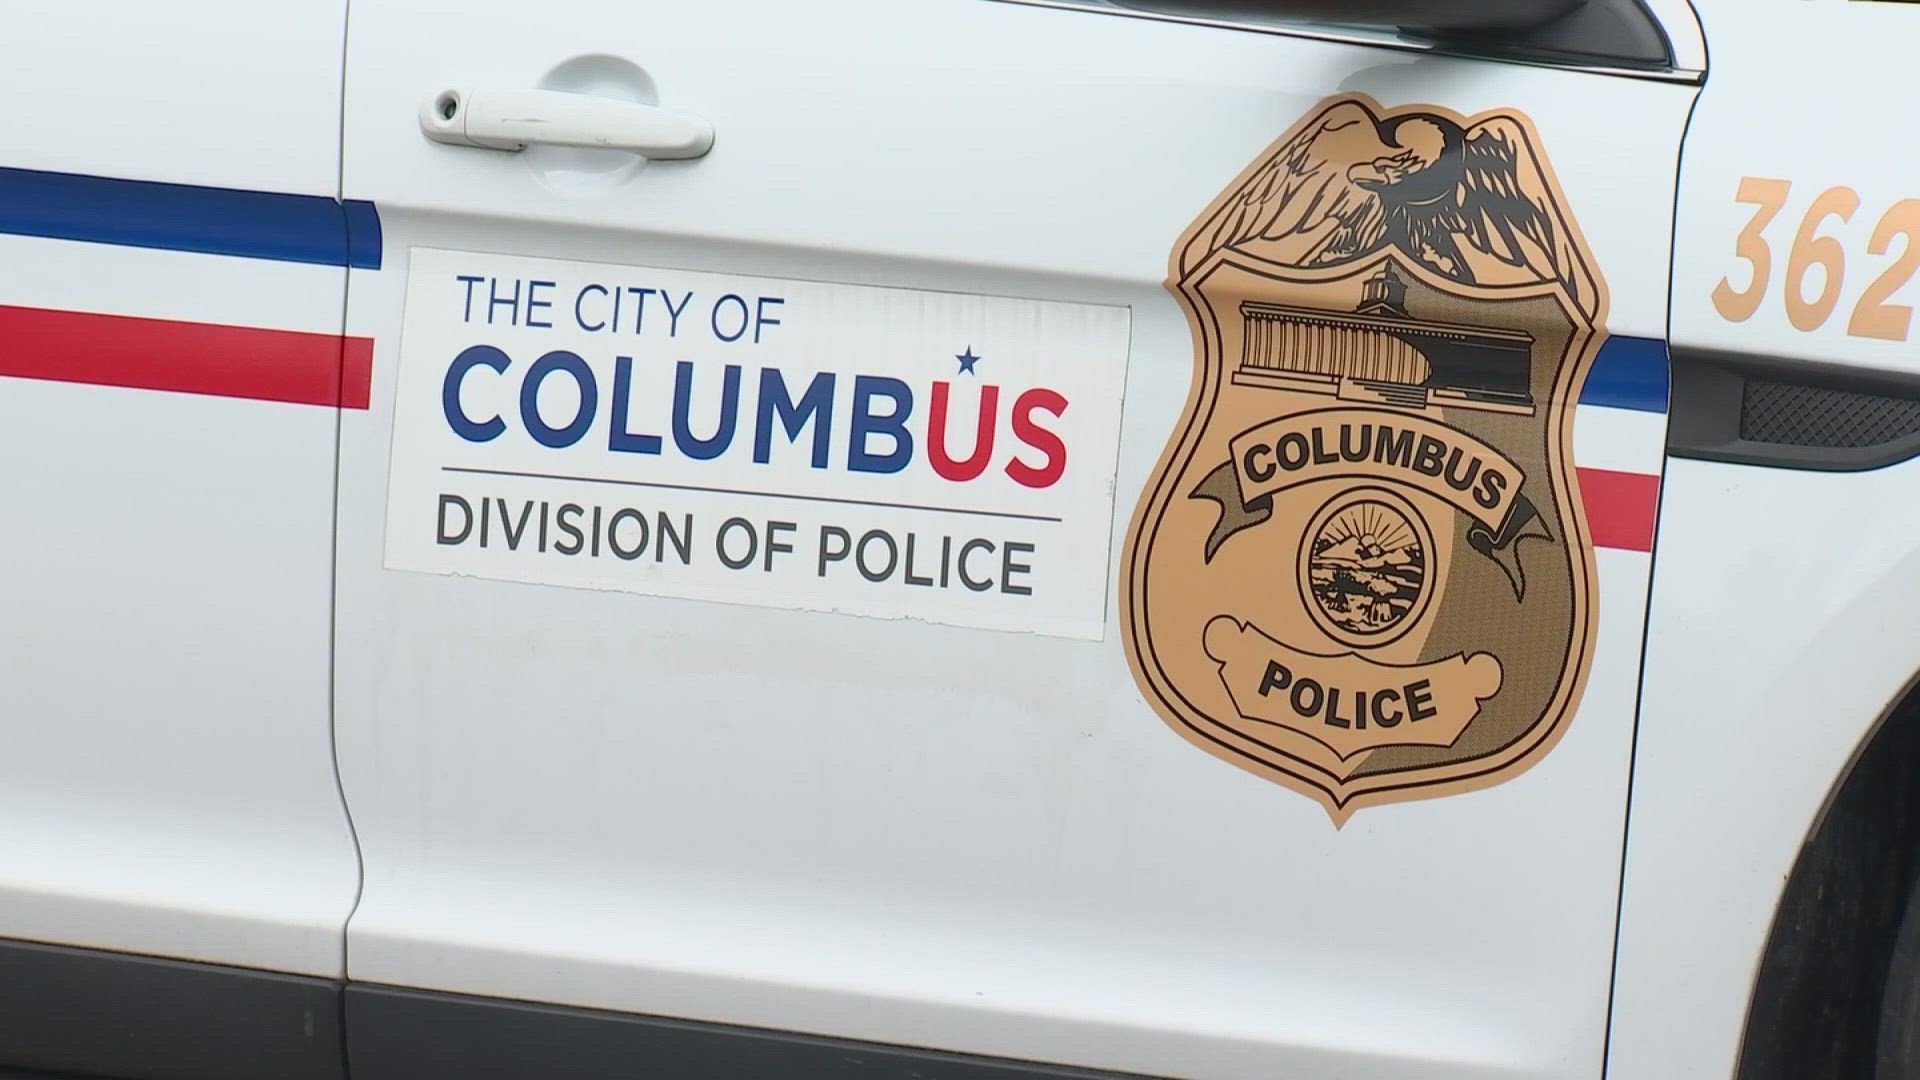 For the next 12 weeks, 26 people will learn what it takes to be an officer with the Columbus Division of Police.